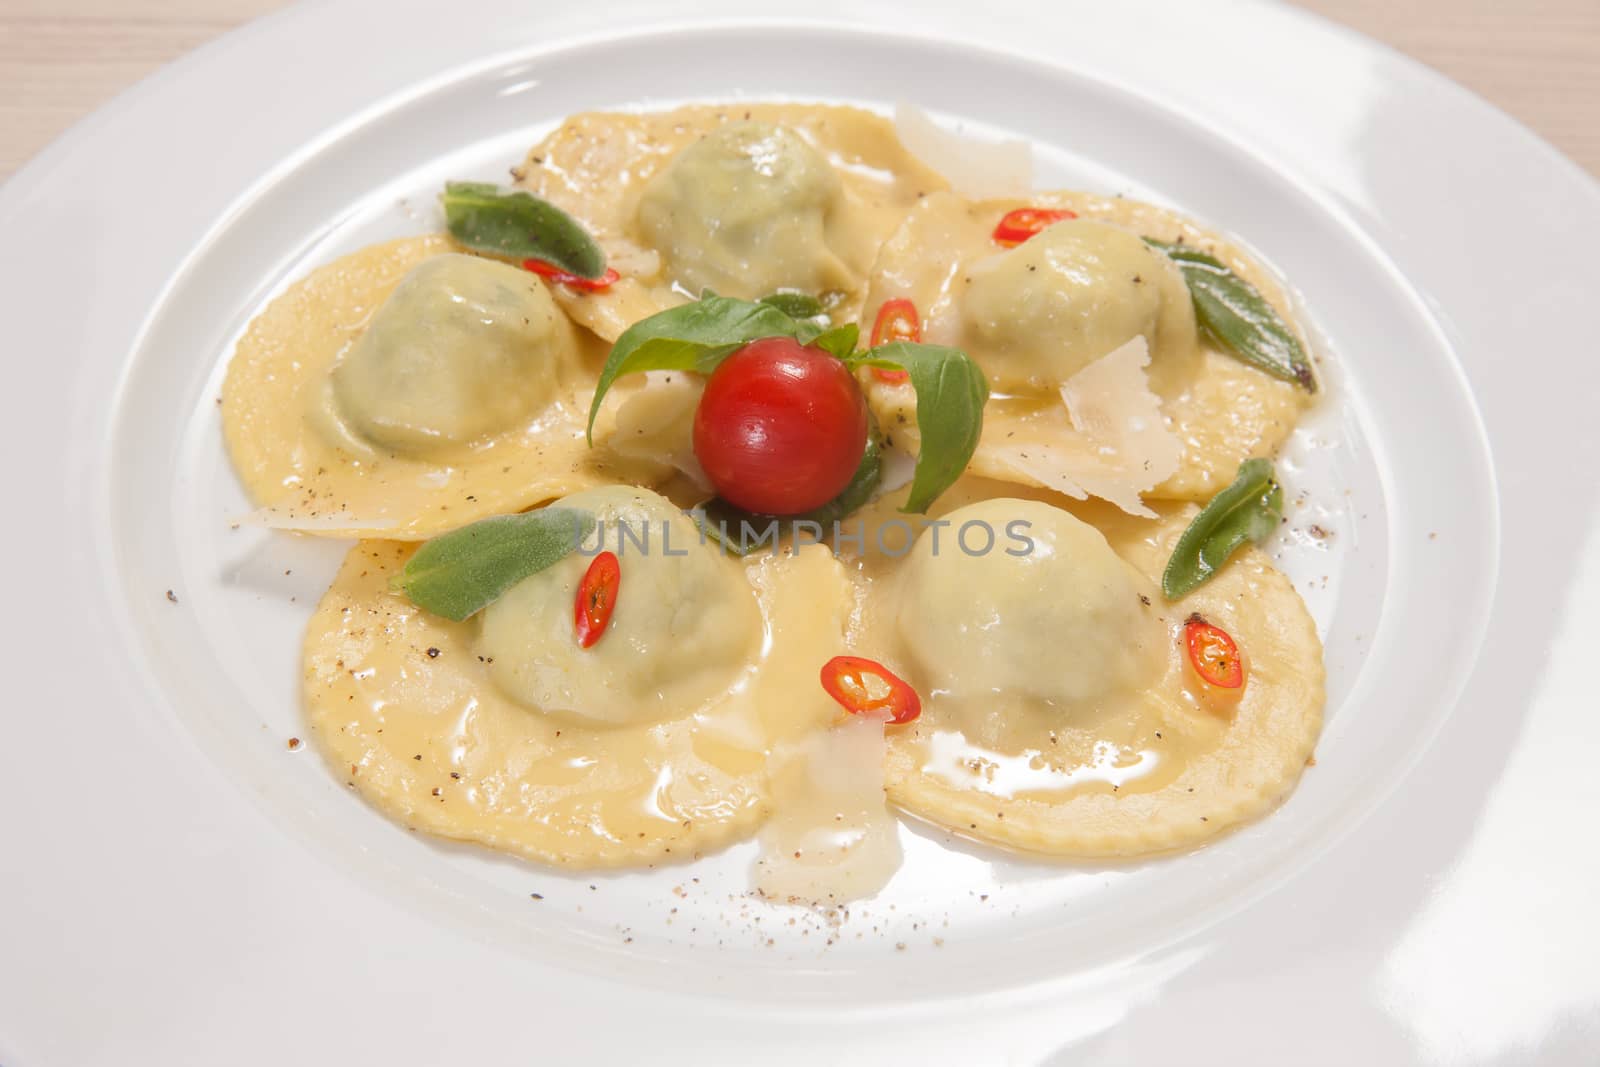 Ravioli with red chily pepper, tomato, cheese and sweet basil